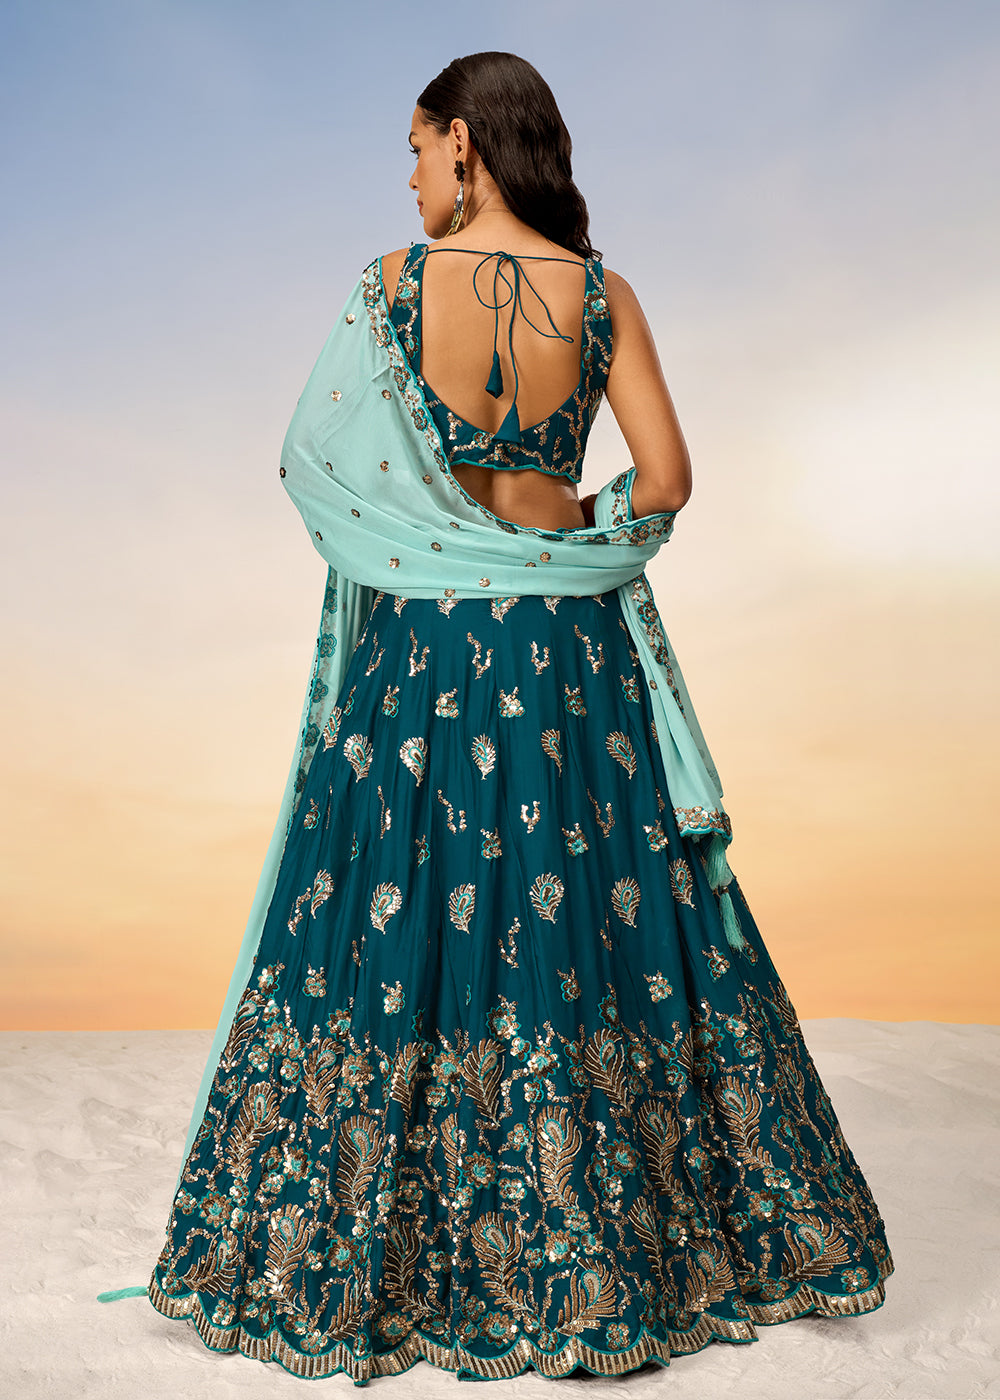 Buy Now Pretty Teal Sequins Embroidered Designer Lehenga Choli Online in USA, UK, Canada & Worldwide at Empress Clothing.